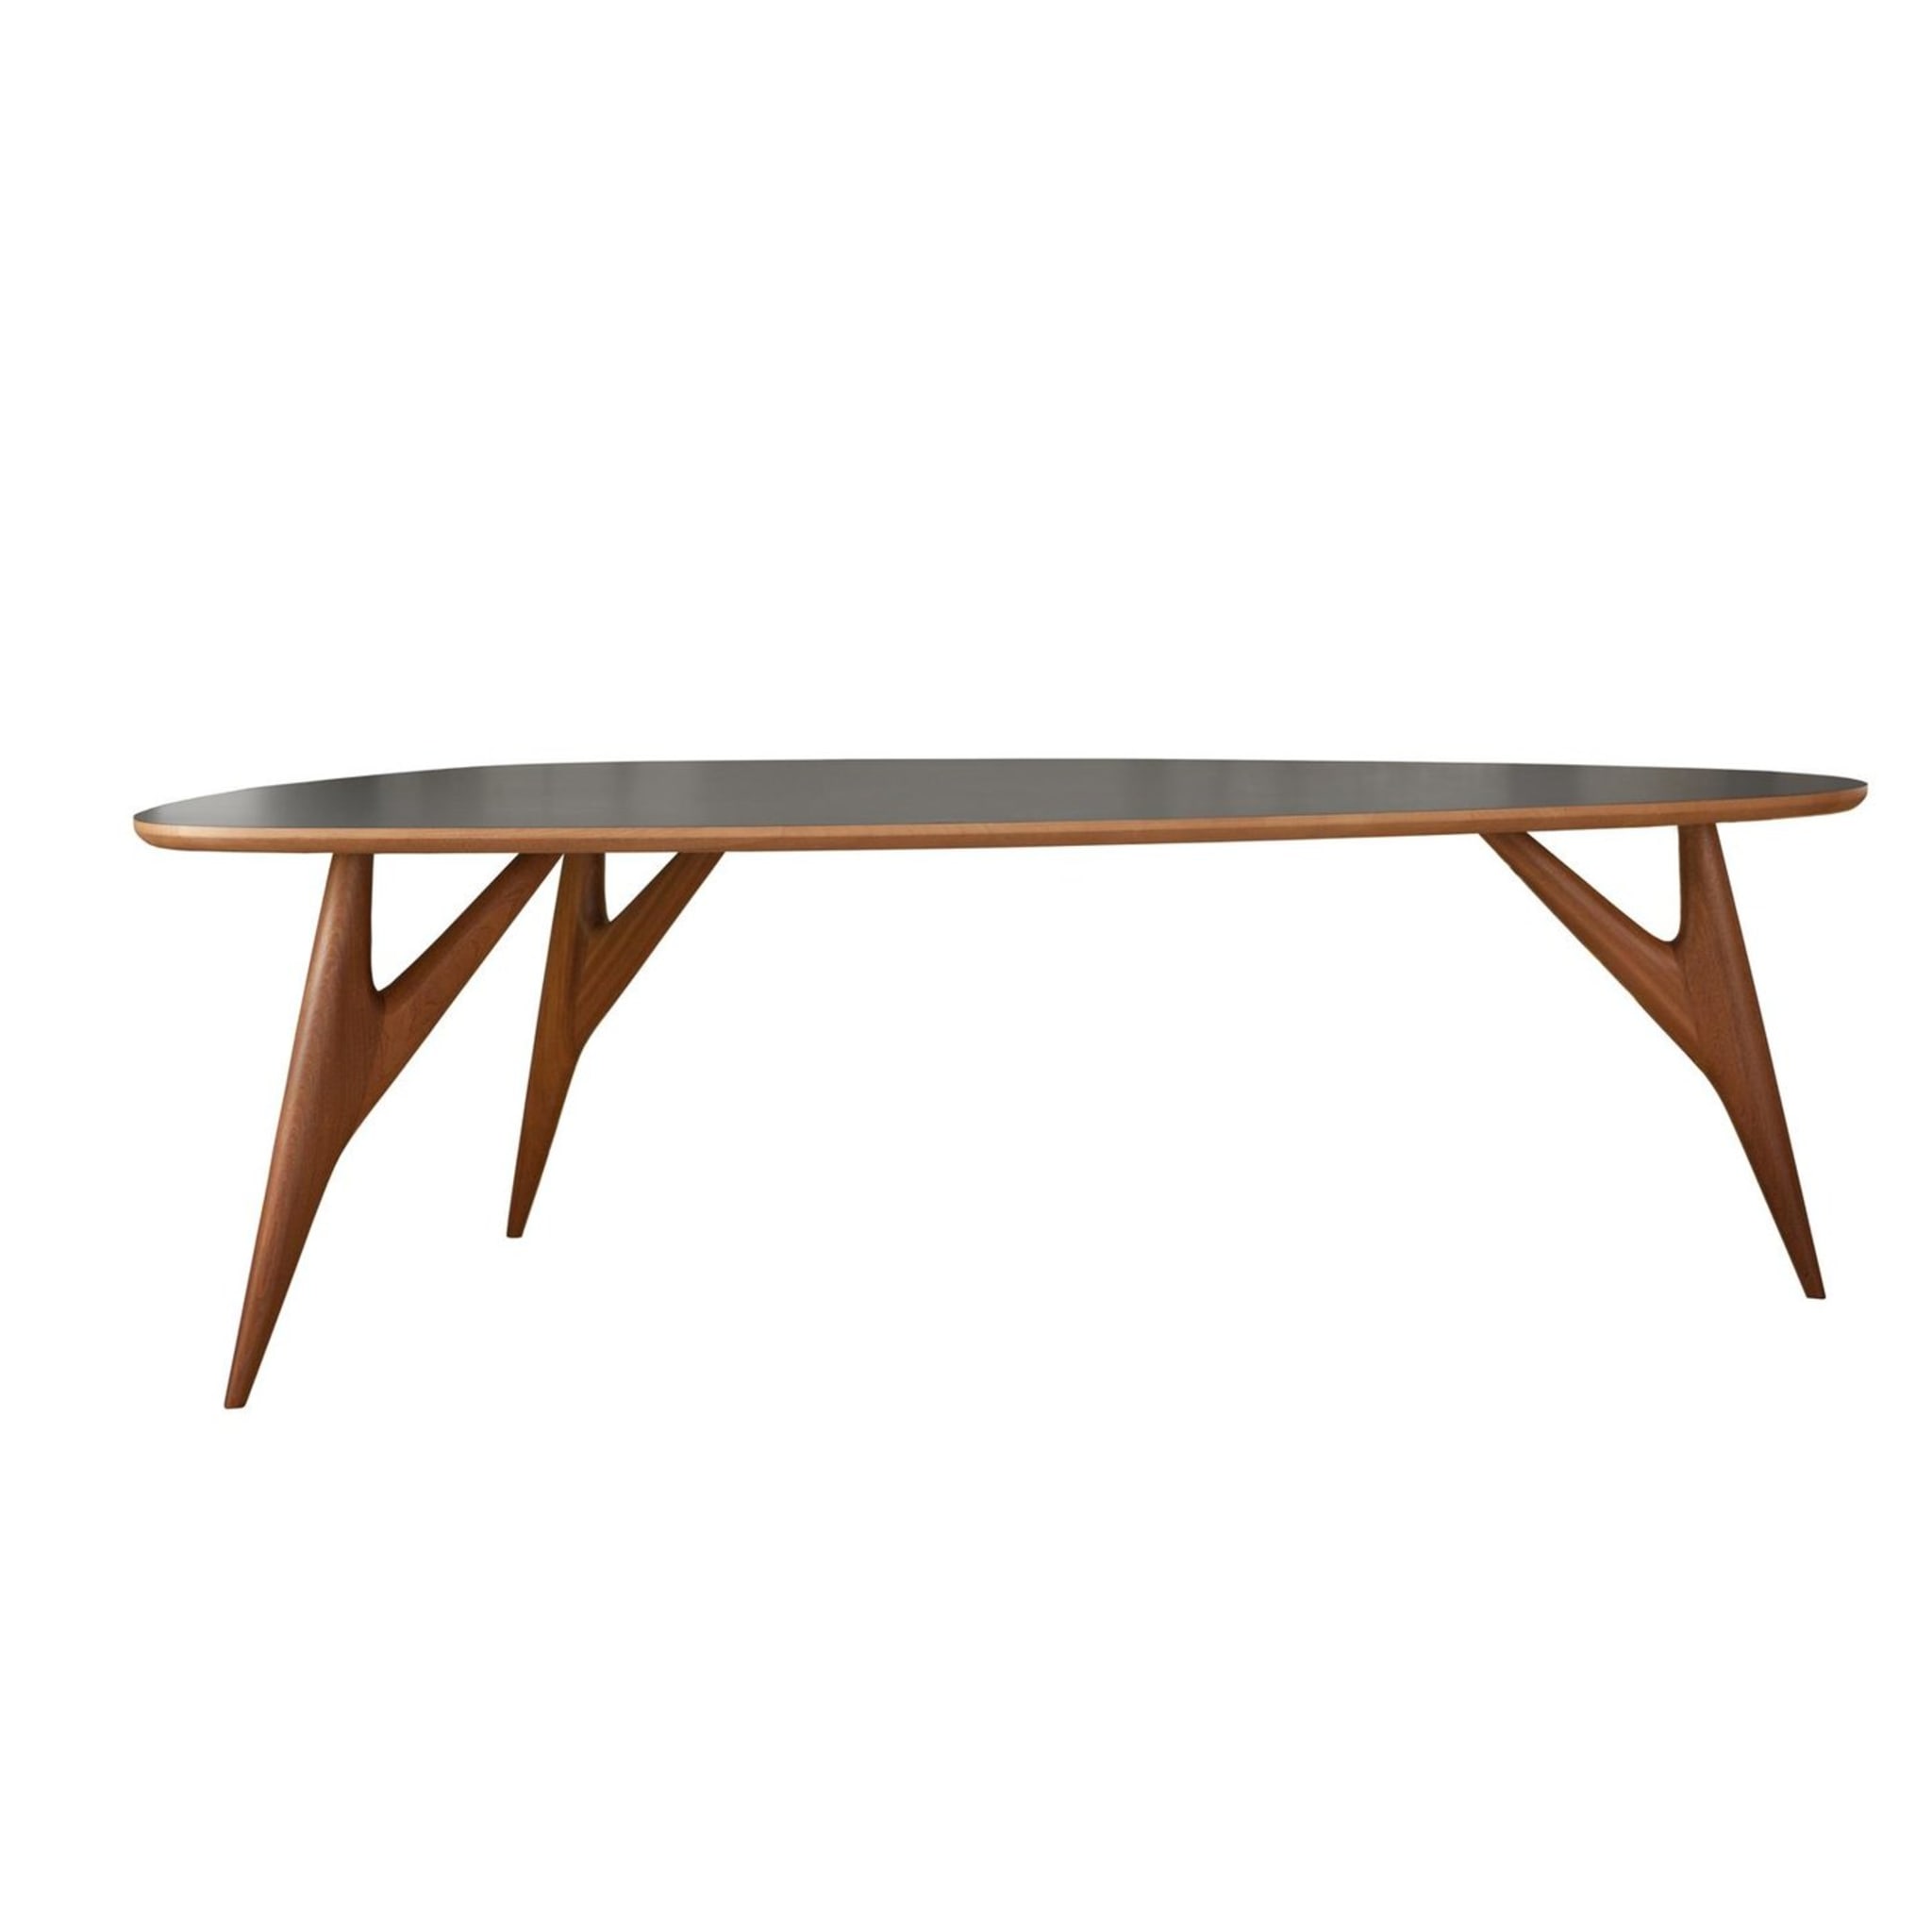 Ted One Gray Dining Table - Alternative view 1